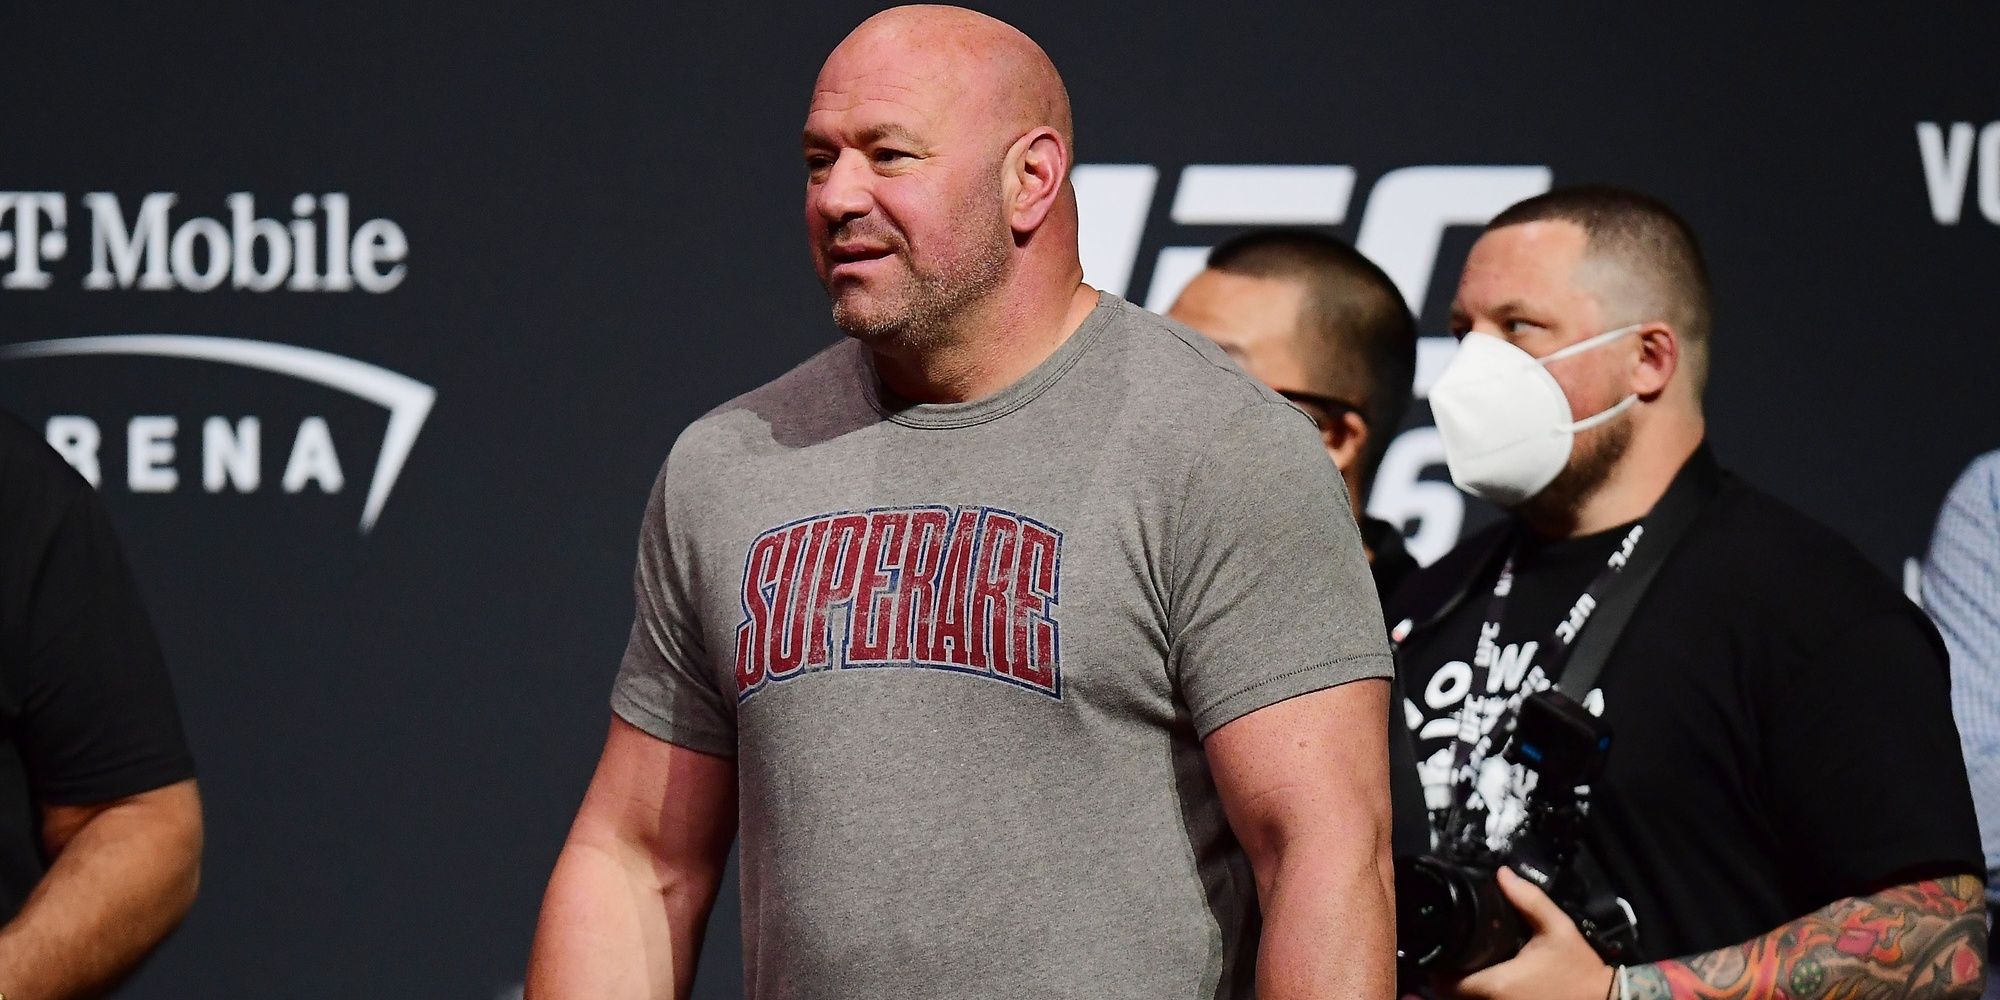 Dana White at the UFC 266 Weigh-Ins Cropped